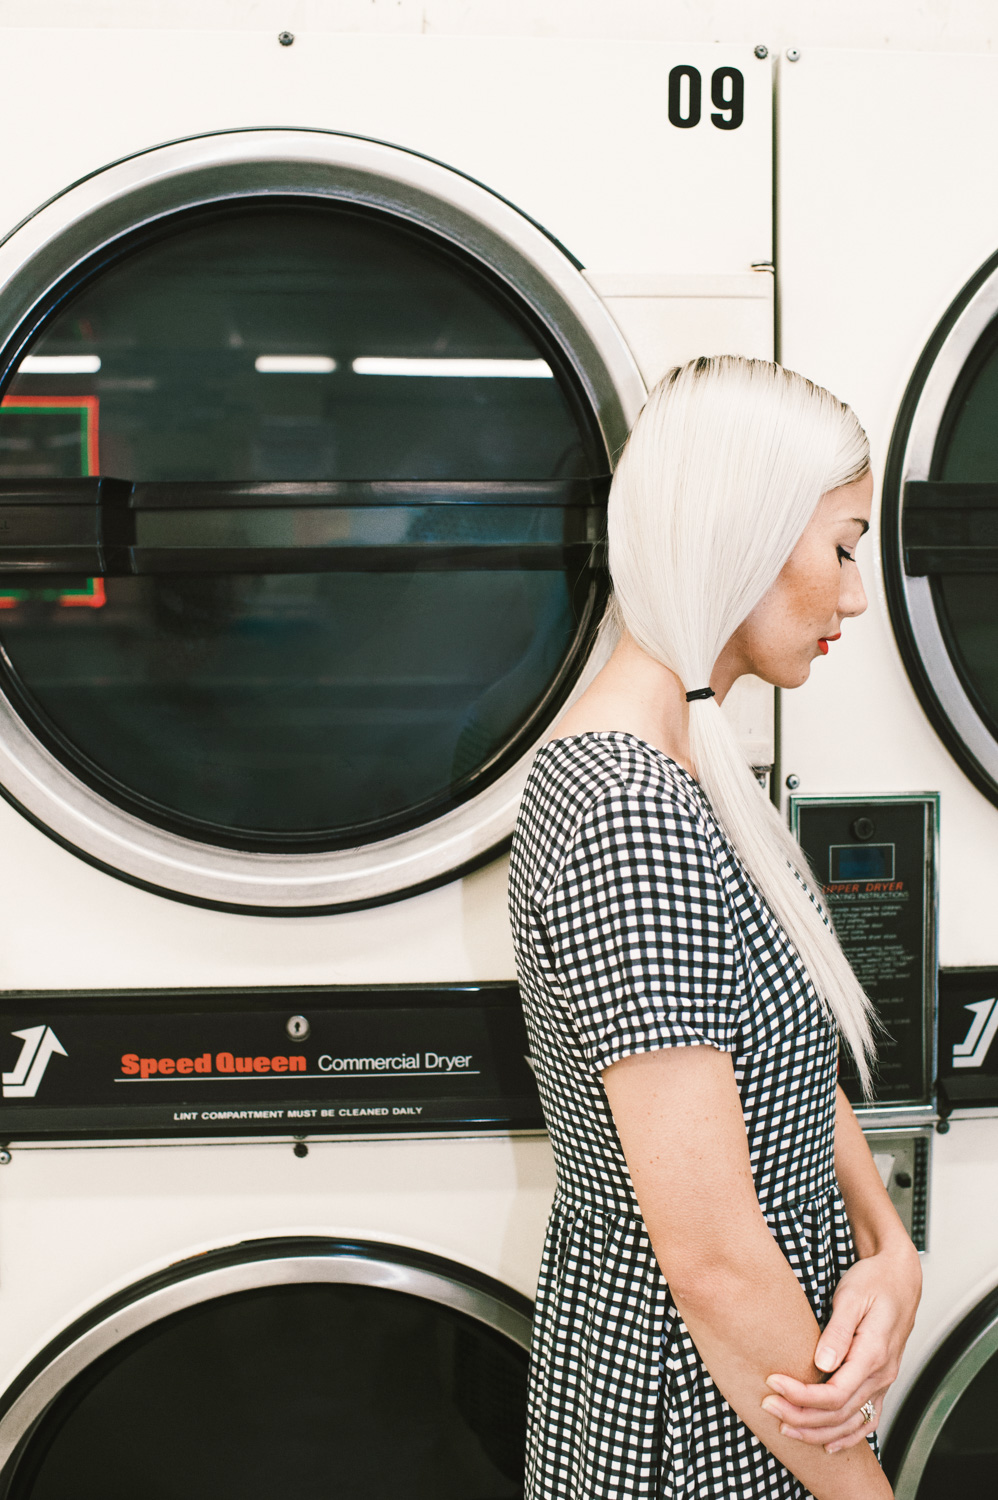 A woman standing next to a washer/dryer at the laundry mat